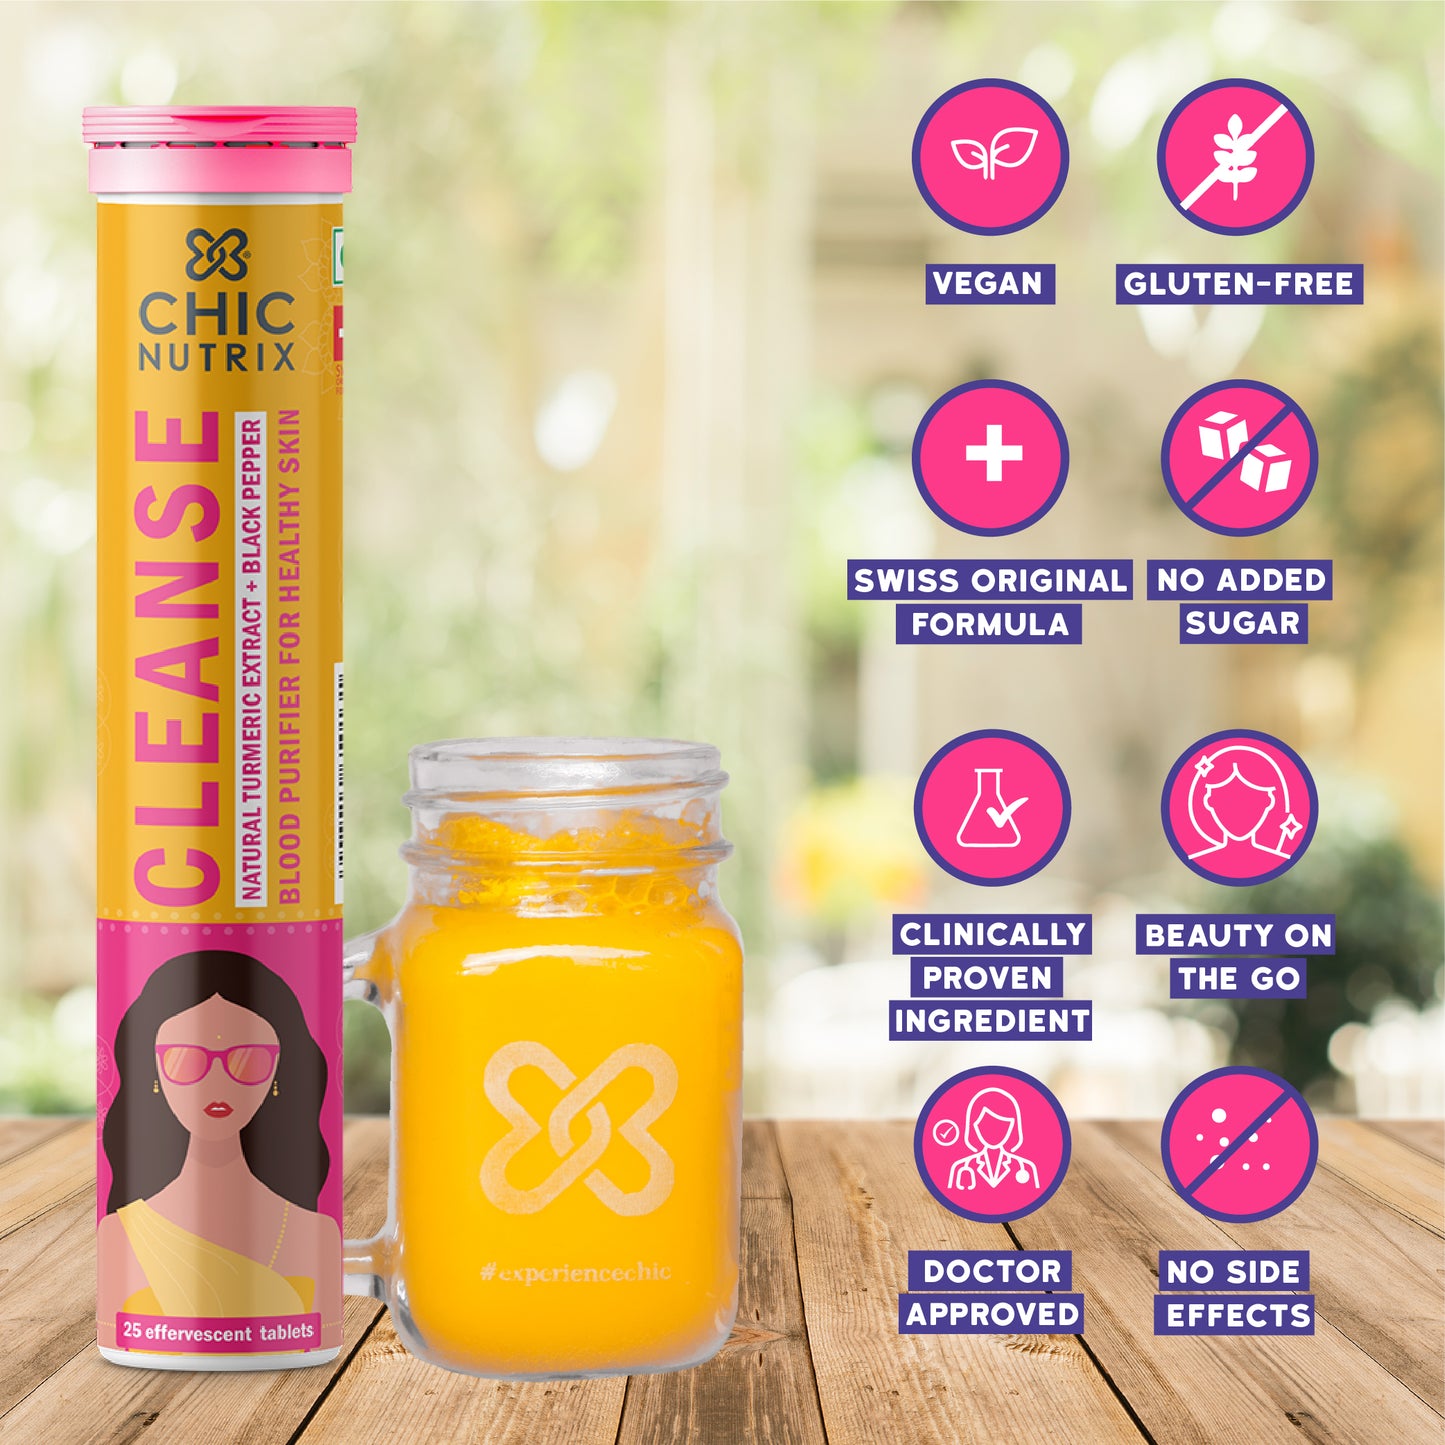 Chicnutrix Cleanse - 500mg Curcumin (Turmeric) + Piperine - Blood Purifier for Healthy Skin - 25 Effervescent Tablet - Mango Flavour